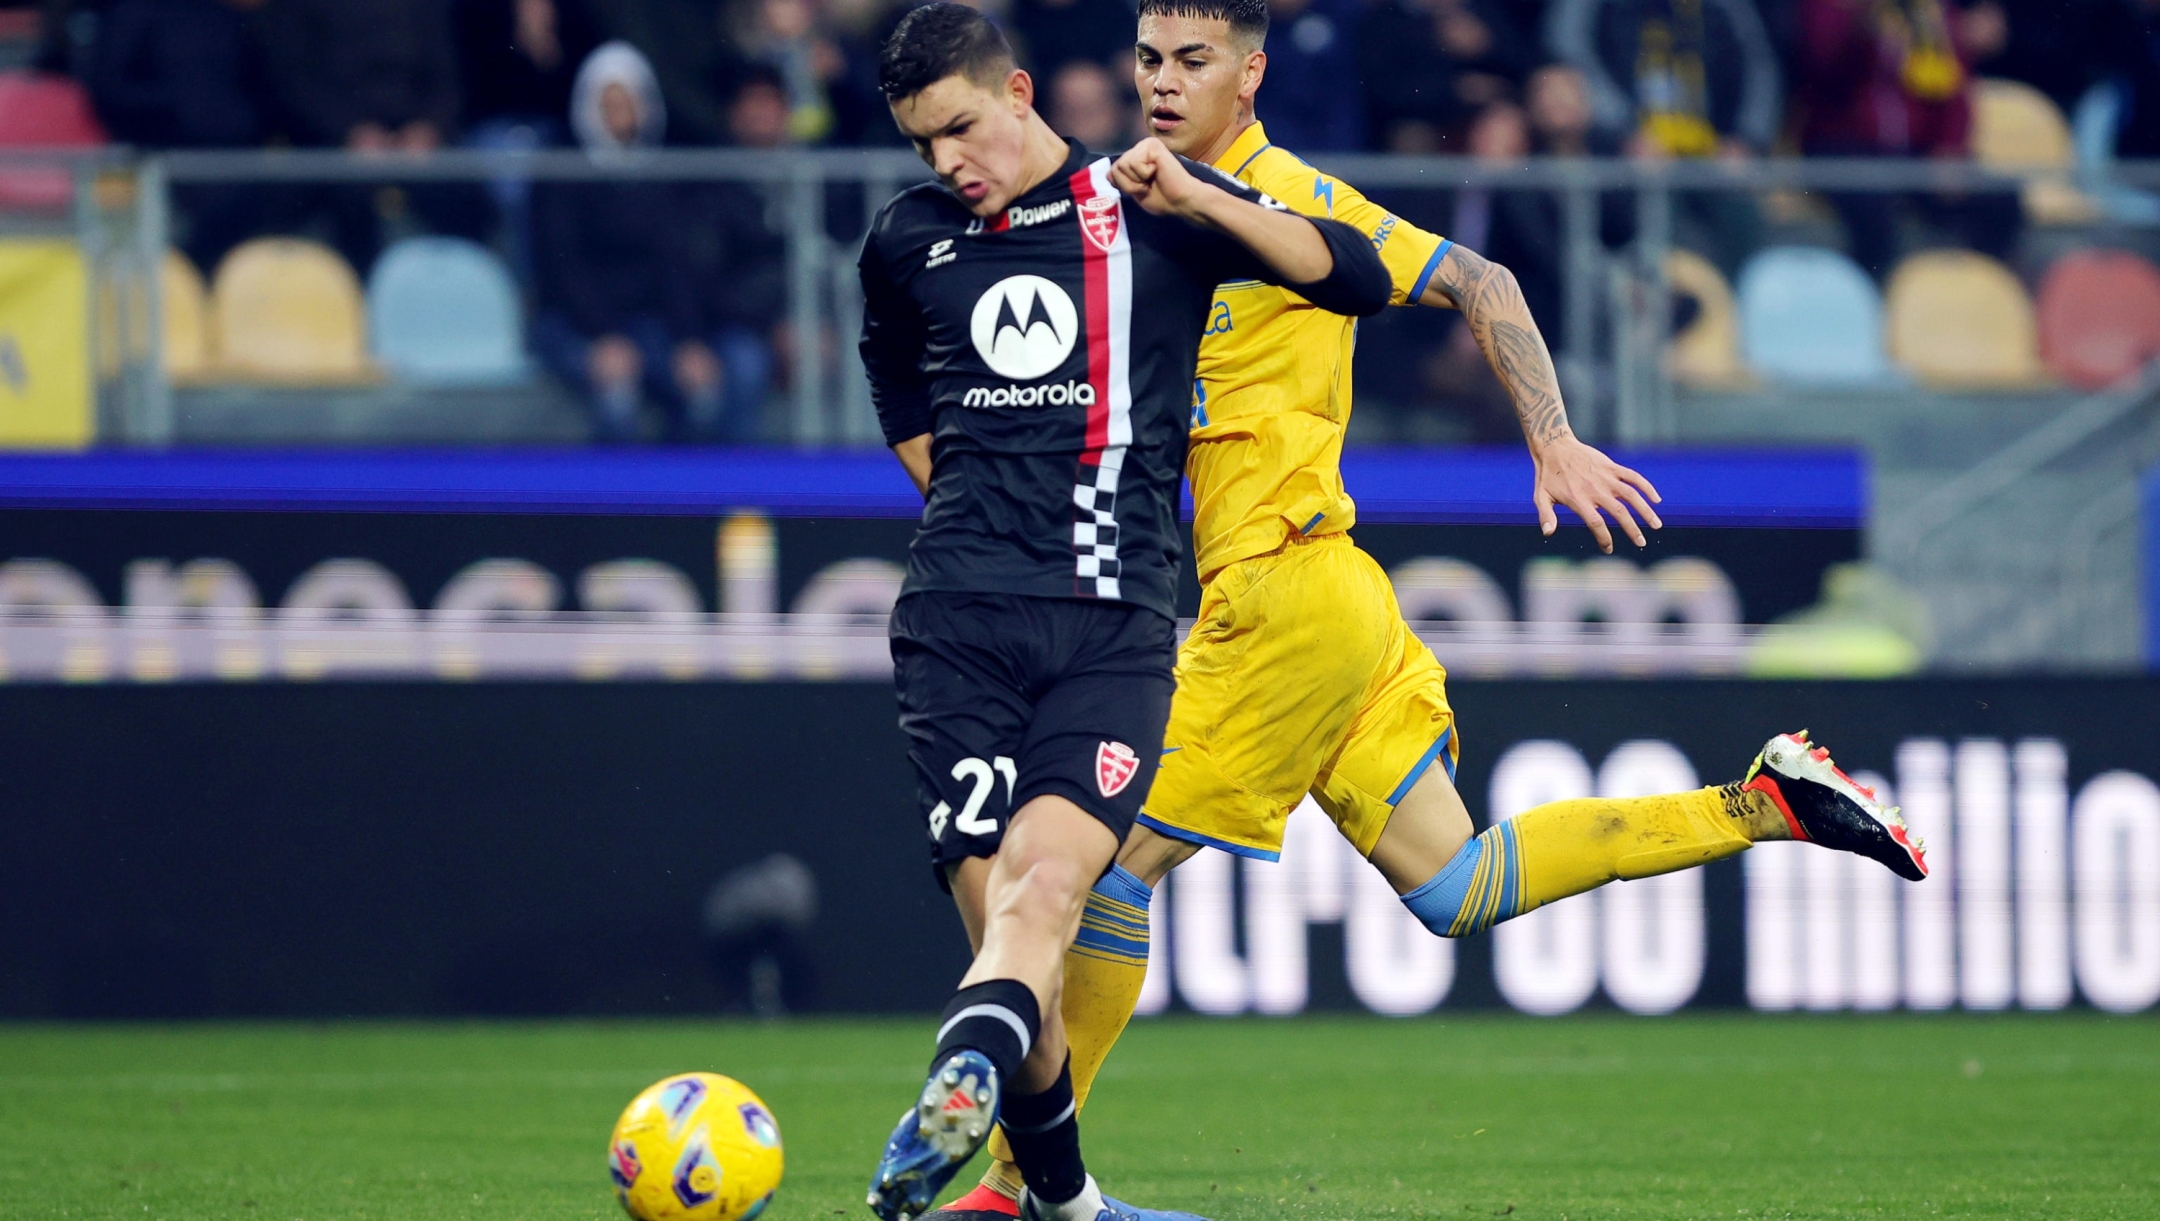 Valentin Carboni of Monza scores 0-2 goal during the Serie A soccer match between Frosinone Calcio and AC Monza at Benito Stirpe stadium in Frosinone, Italy, 6 January 2024. ANSA/FEDERICO PROIETTI